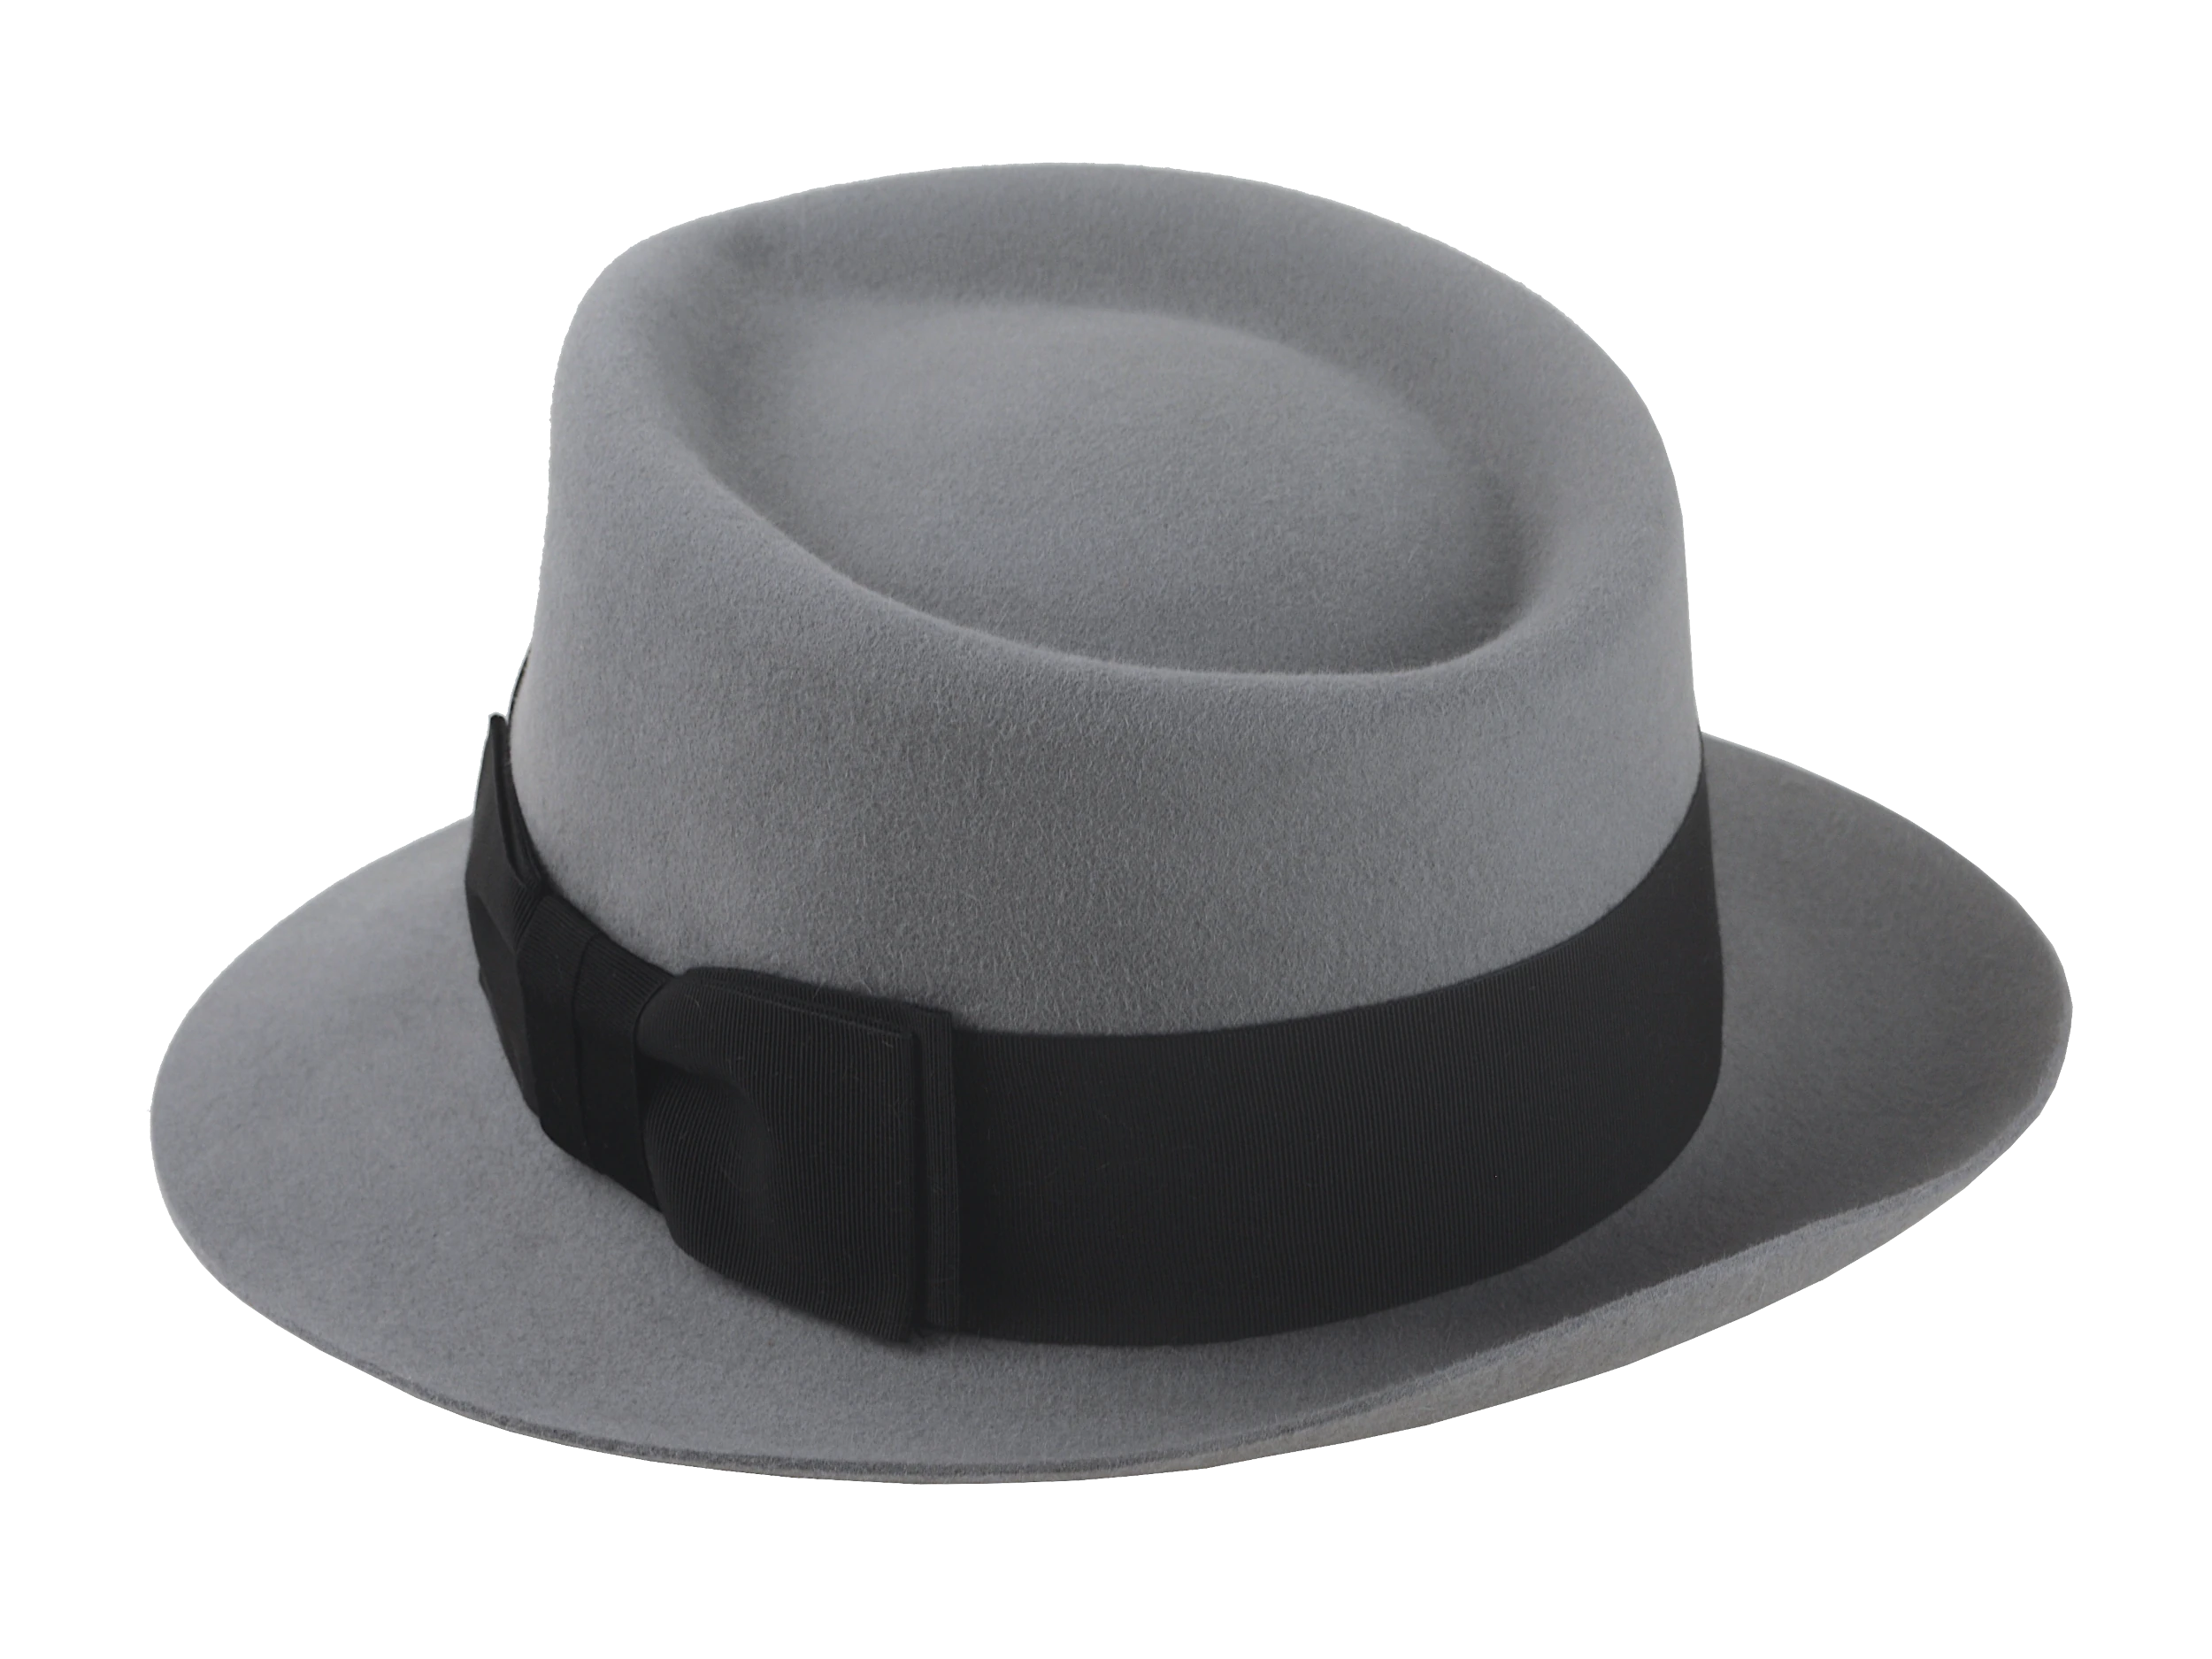 The Rick's Reserve Snap-Brim Fedora - Angled view highlighting the teardrop crown design | Agnoulita Hats